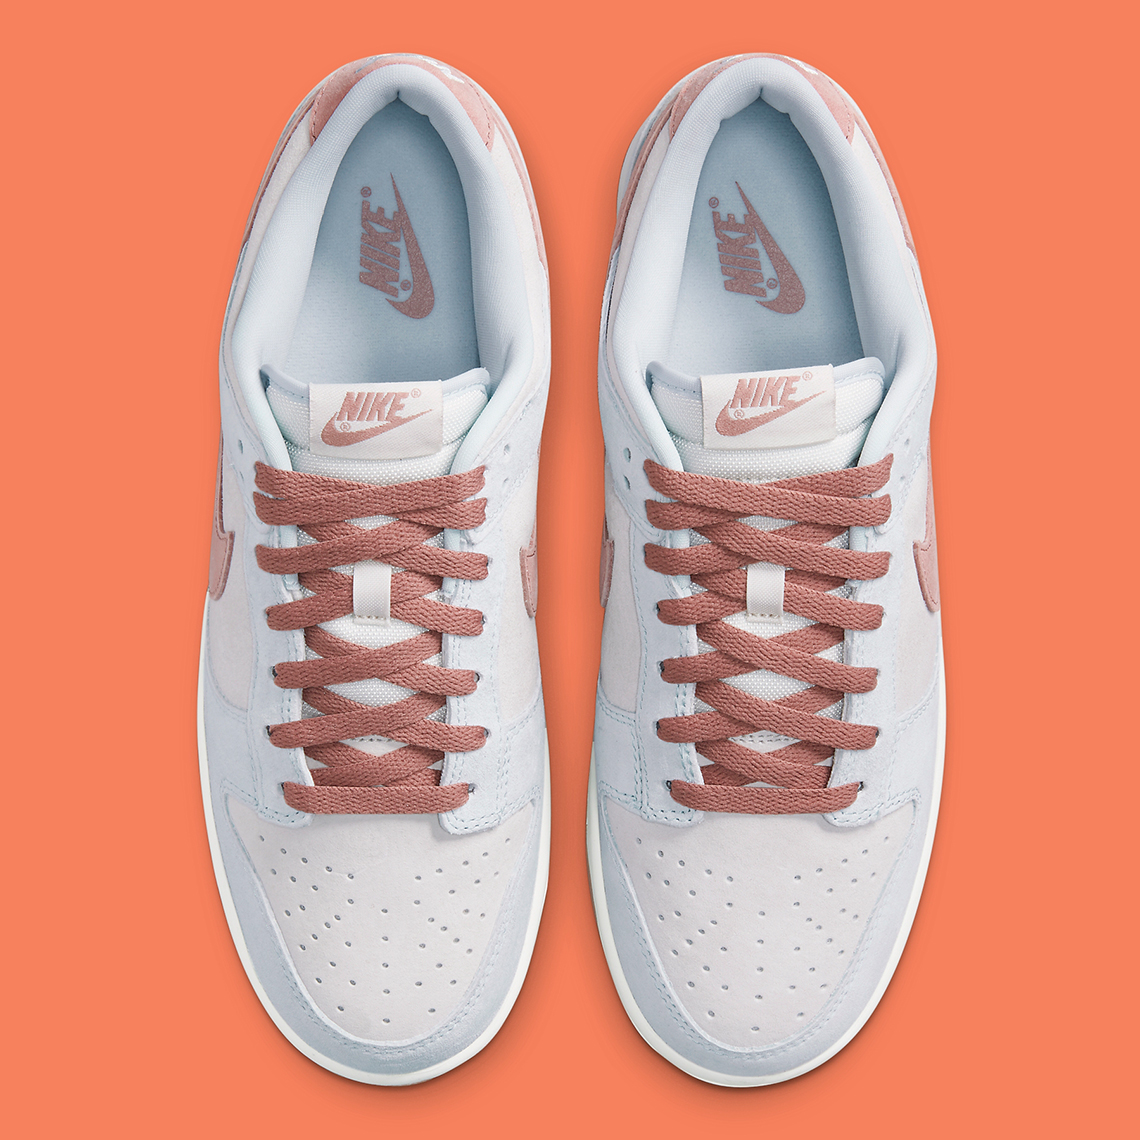 Nike Dunk Low Fossil Rose Dh7577 001 2